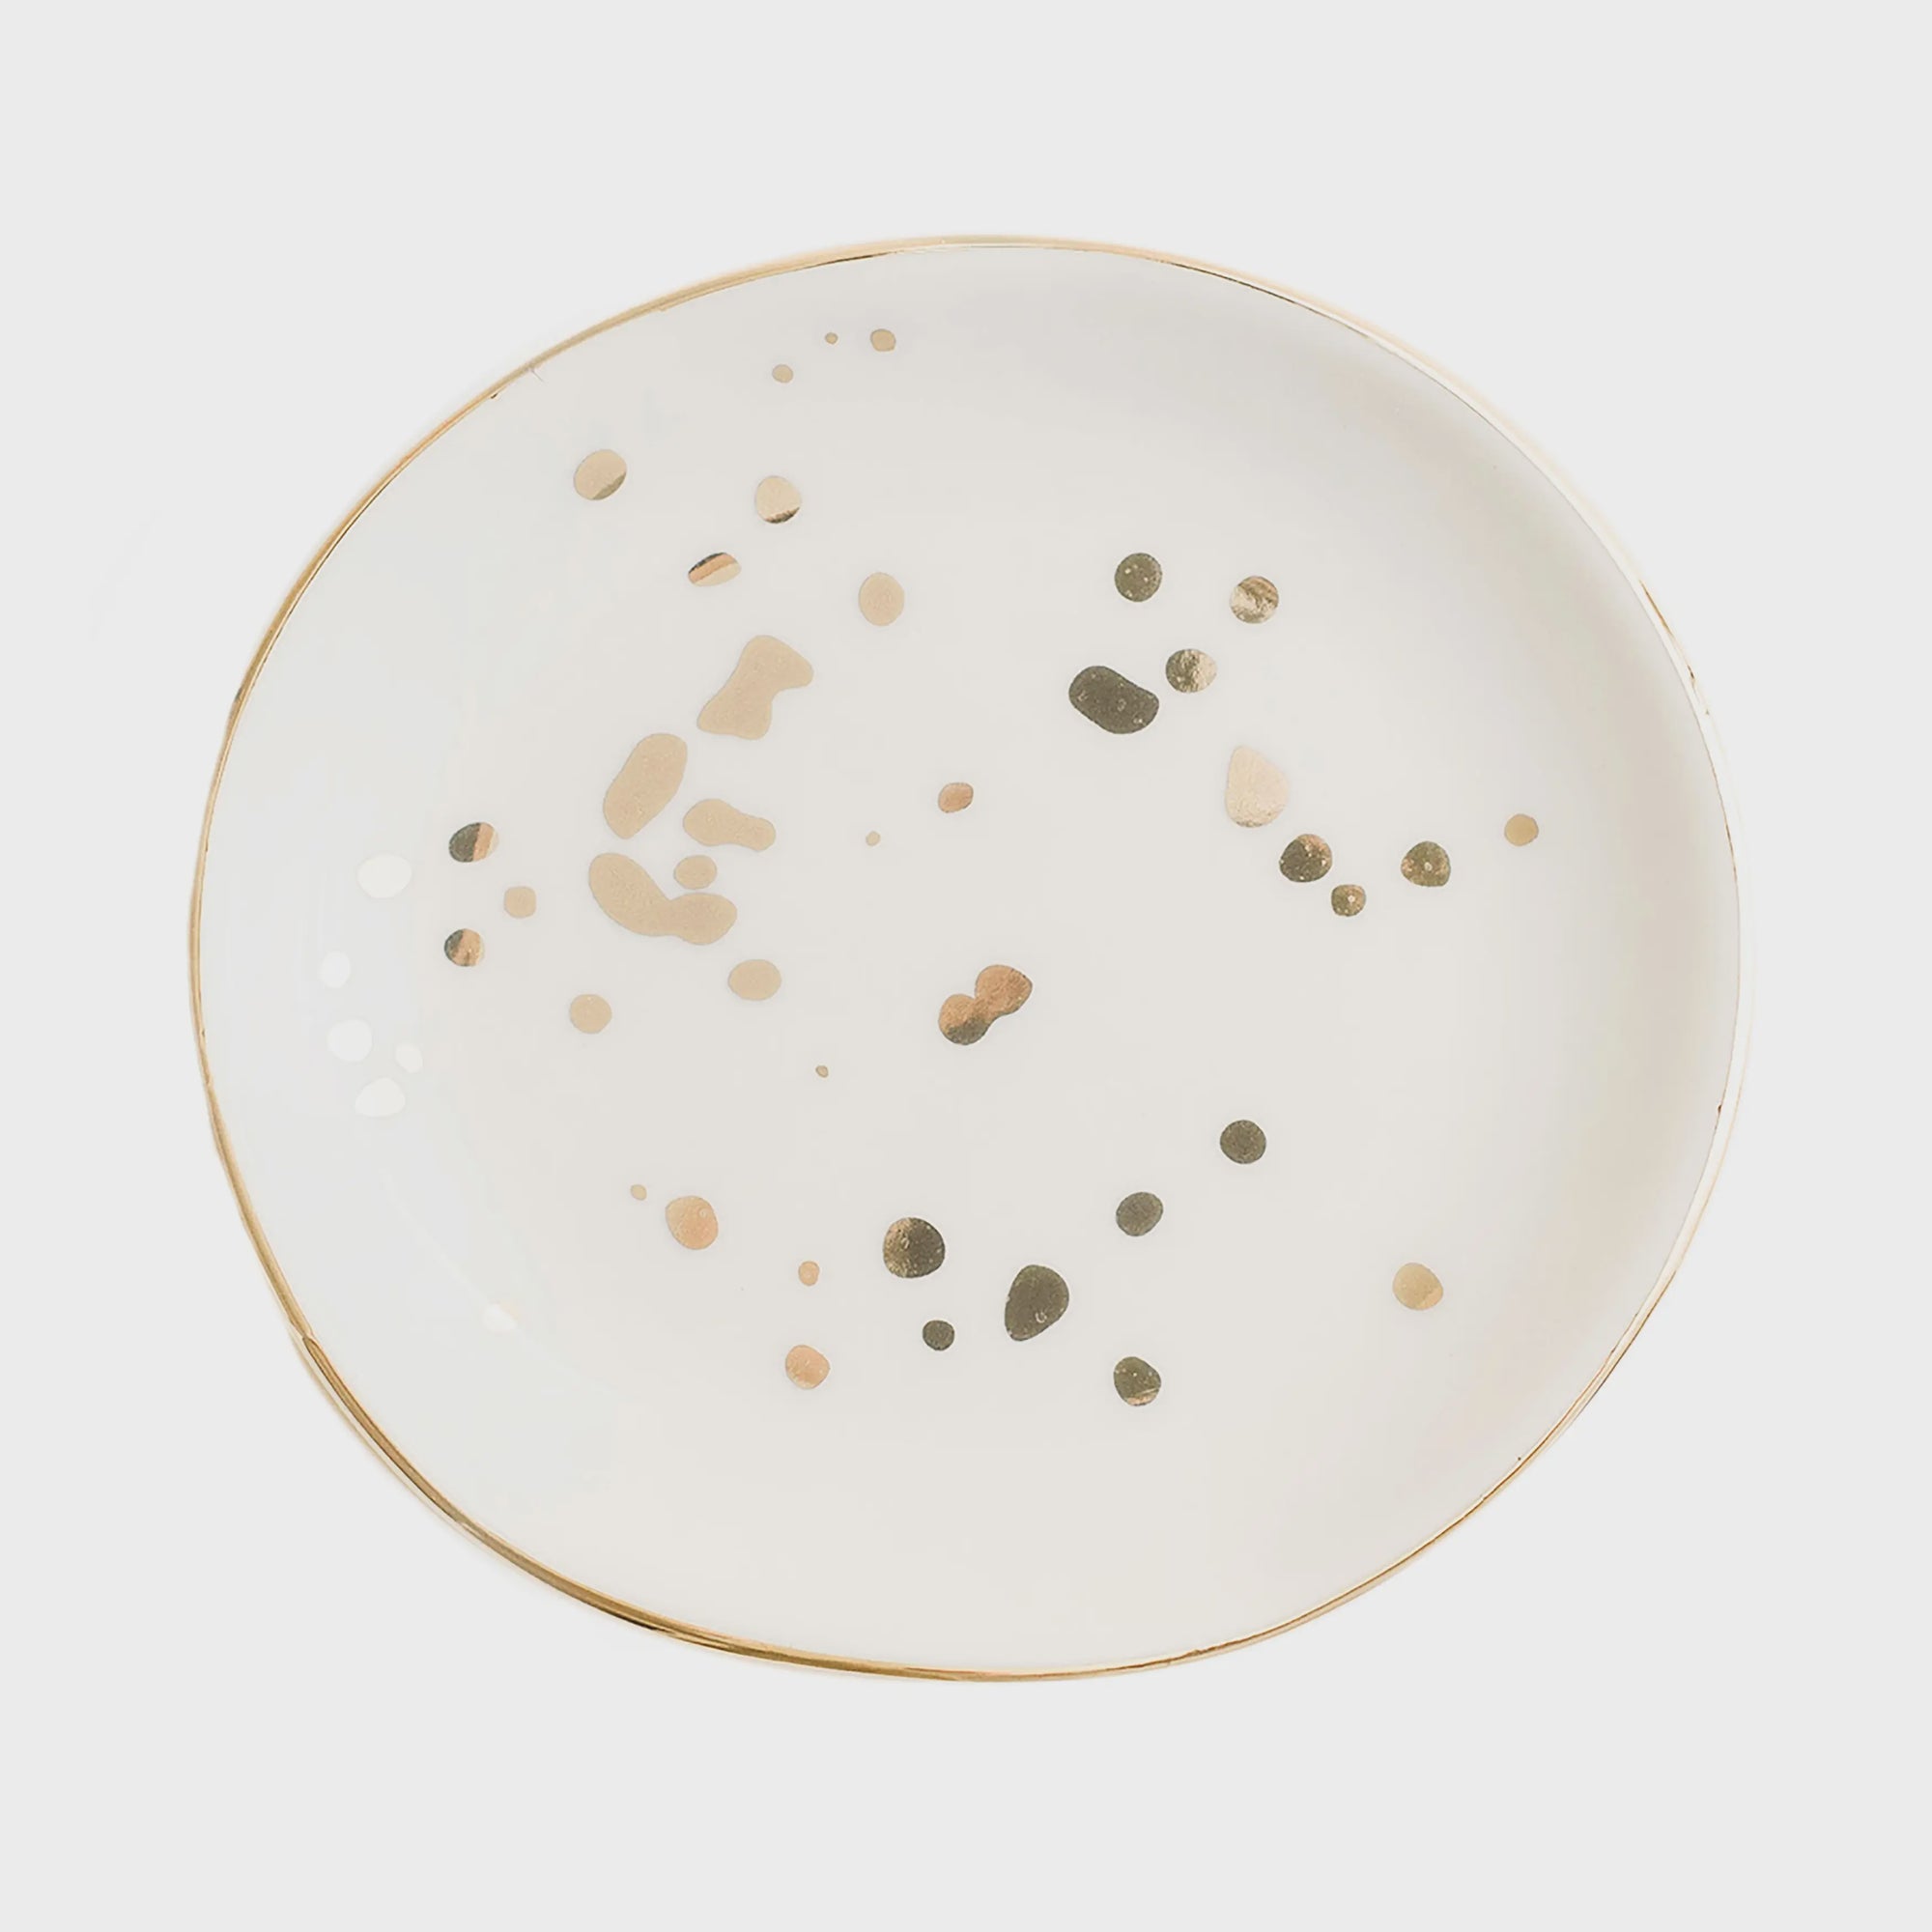 The White Gold Speckled Jewelry Dish by Sweet Water Decor